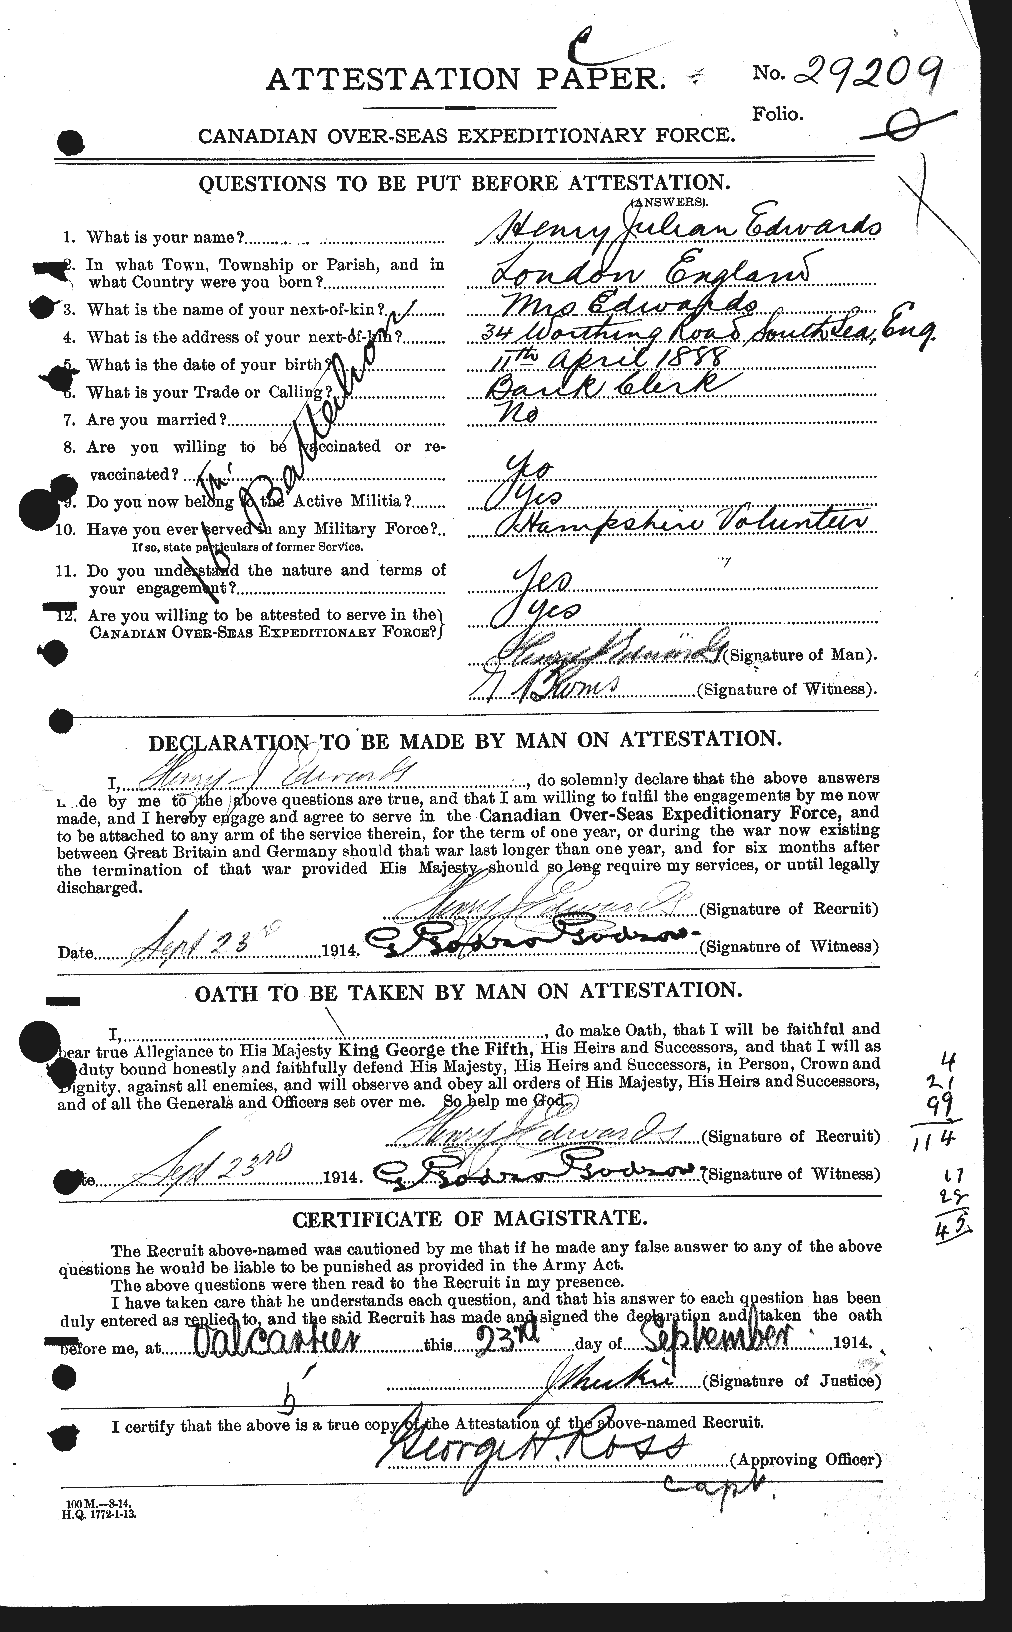 Personnel Records of the First World War - CEF 309763a